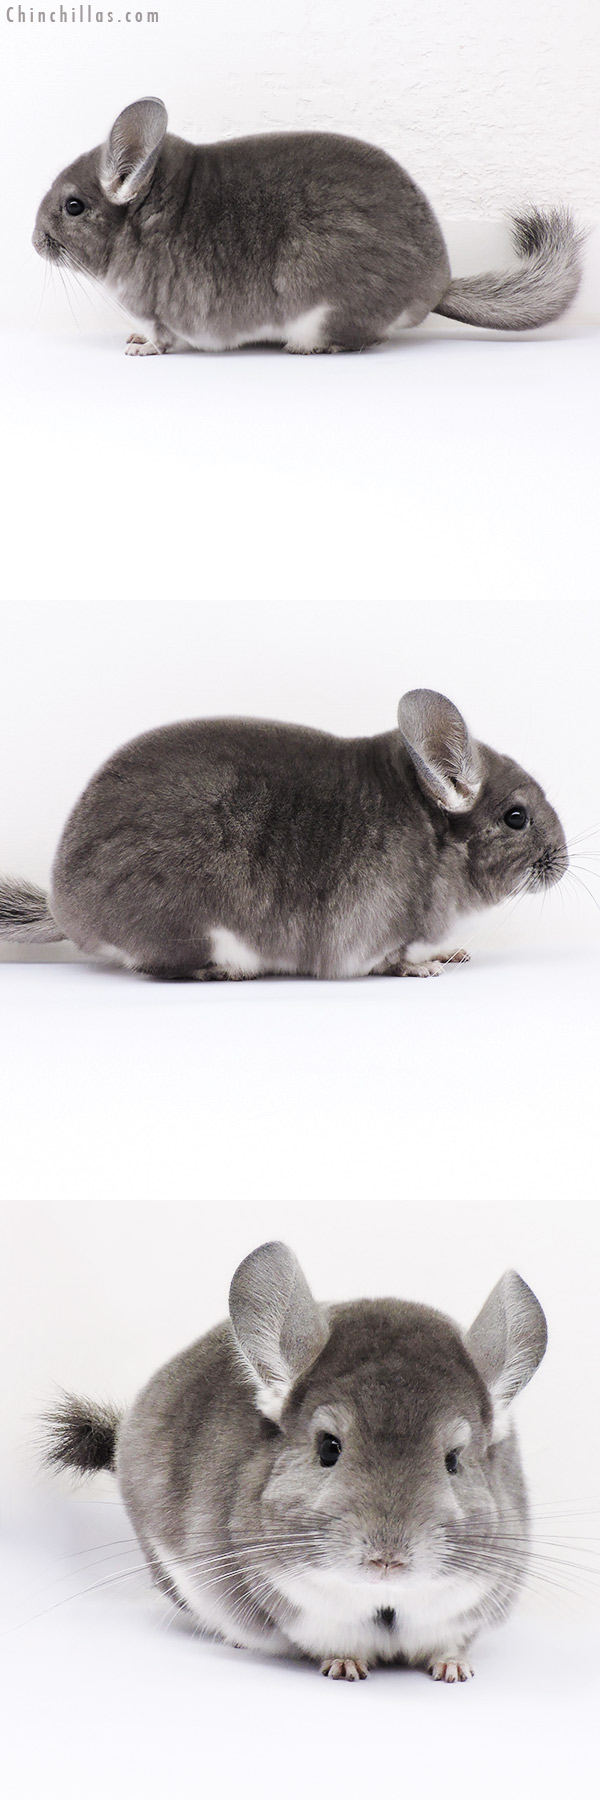 Chinchilla or related item offered for sale or export on Chinchillas.com - 16312 Premium Production Quality Violet Female Chinchilla